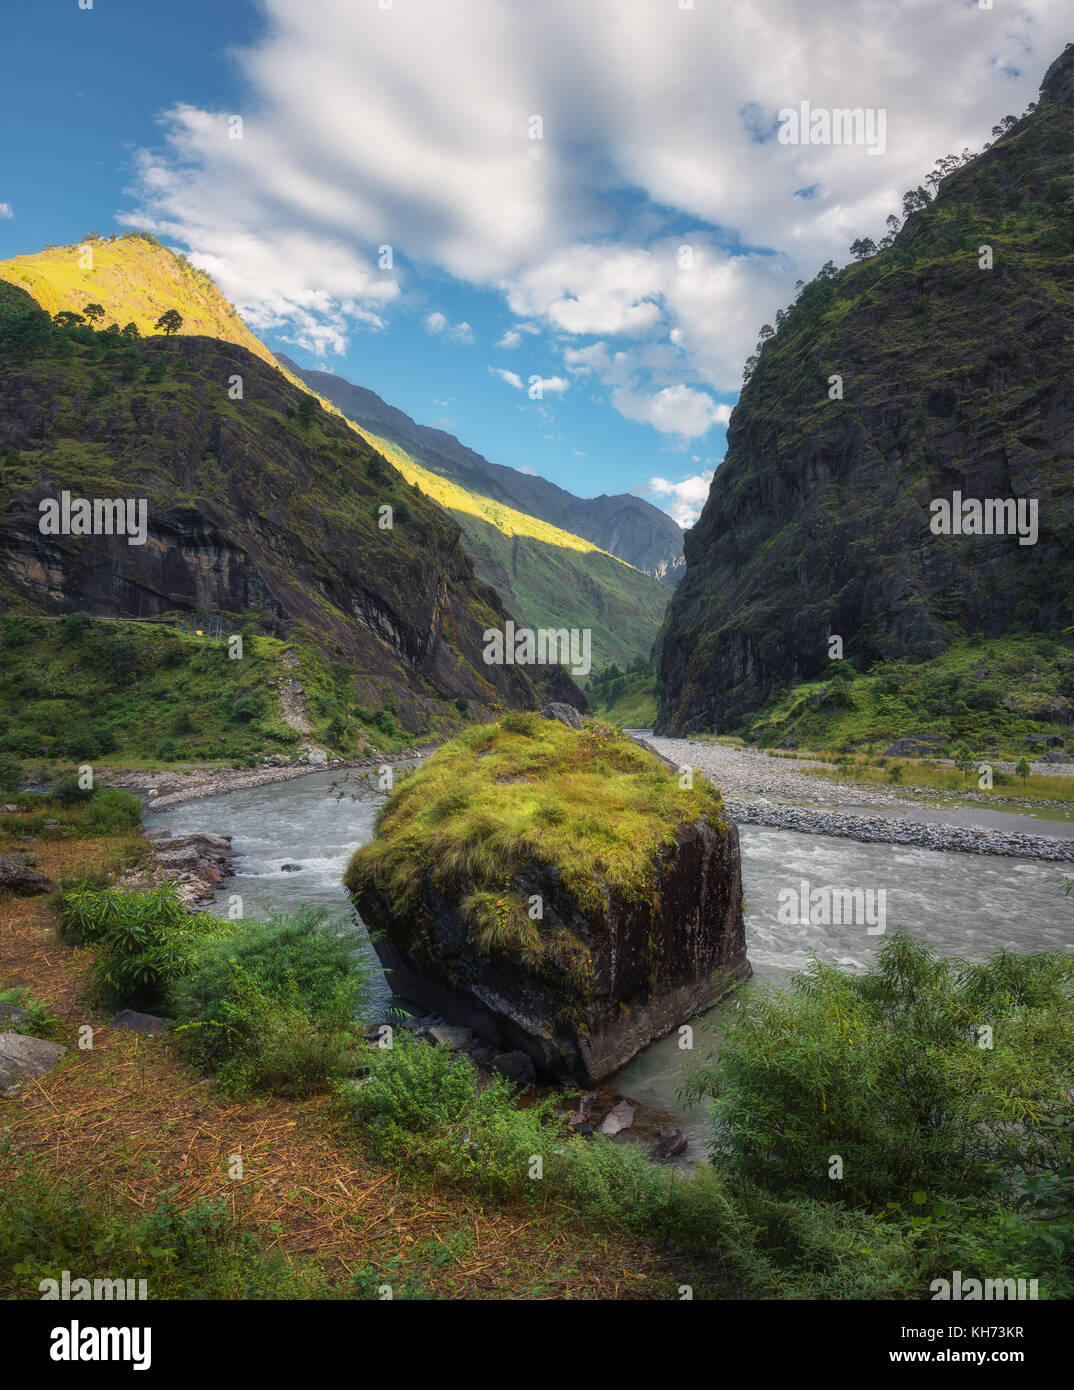 Amazing view with high Himalayan mountains, beautiful river, green forest, blue sky with clouds and big stone in water in autumn in Nepal at sunrise.  Stock Photo